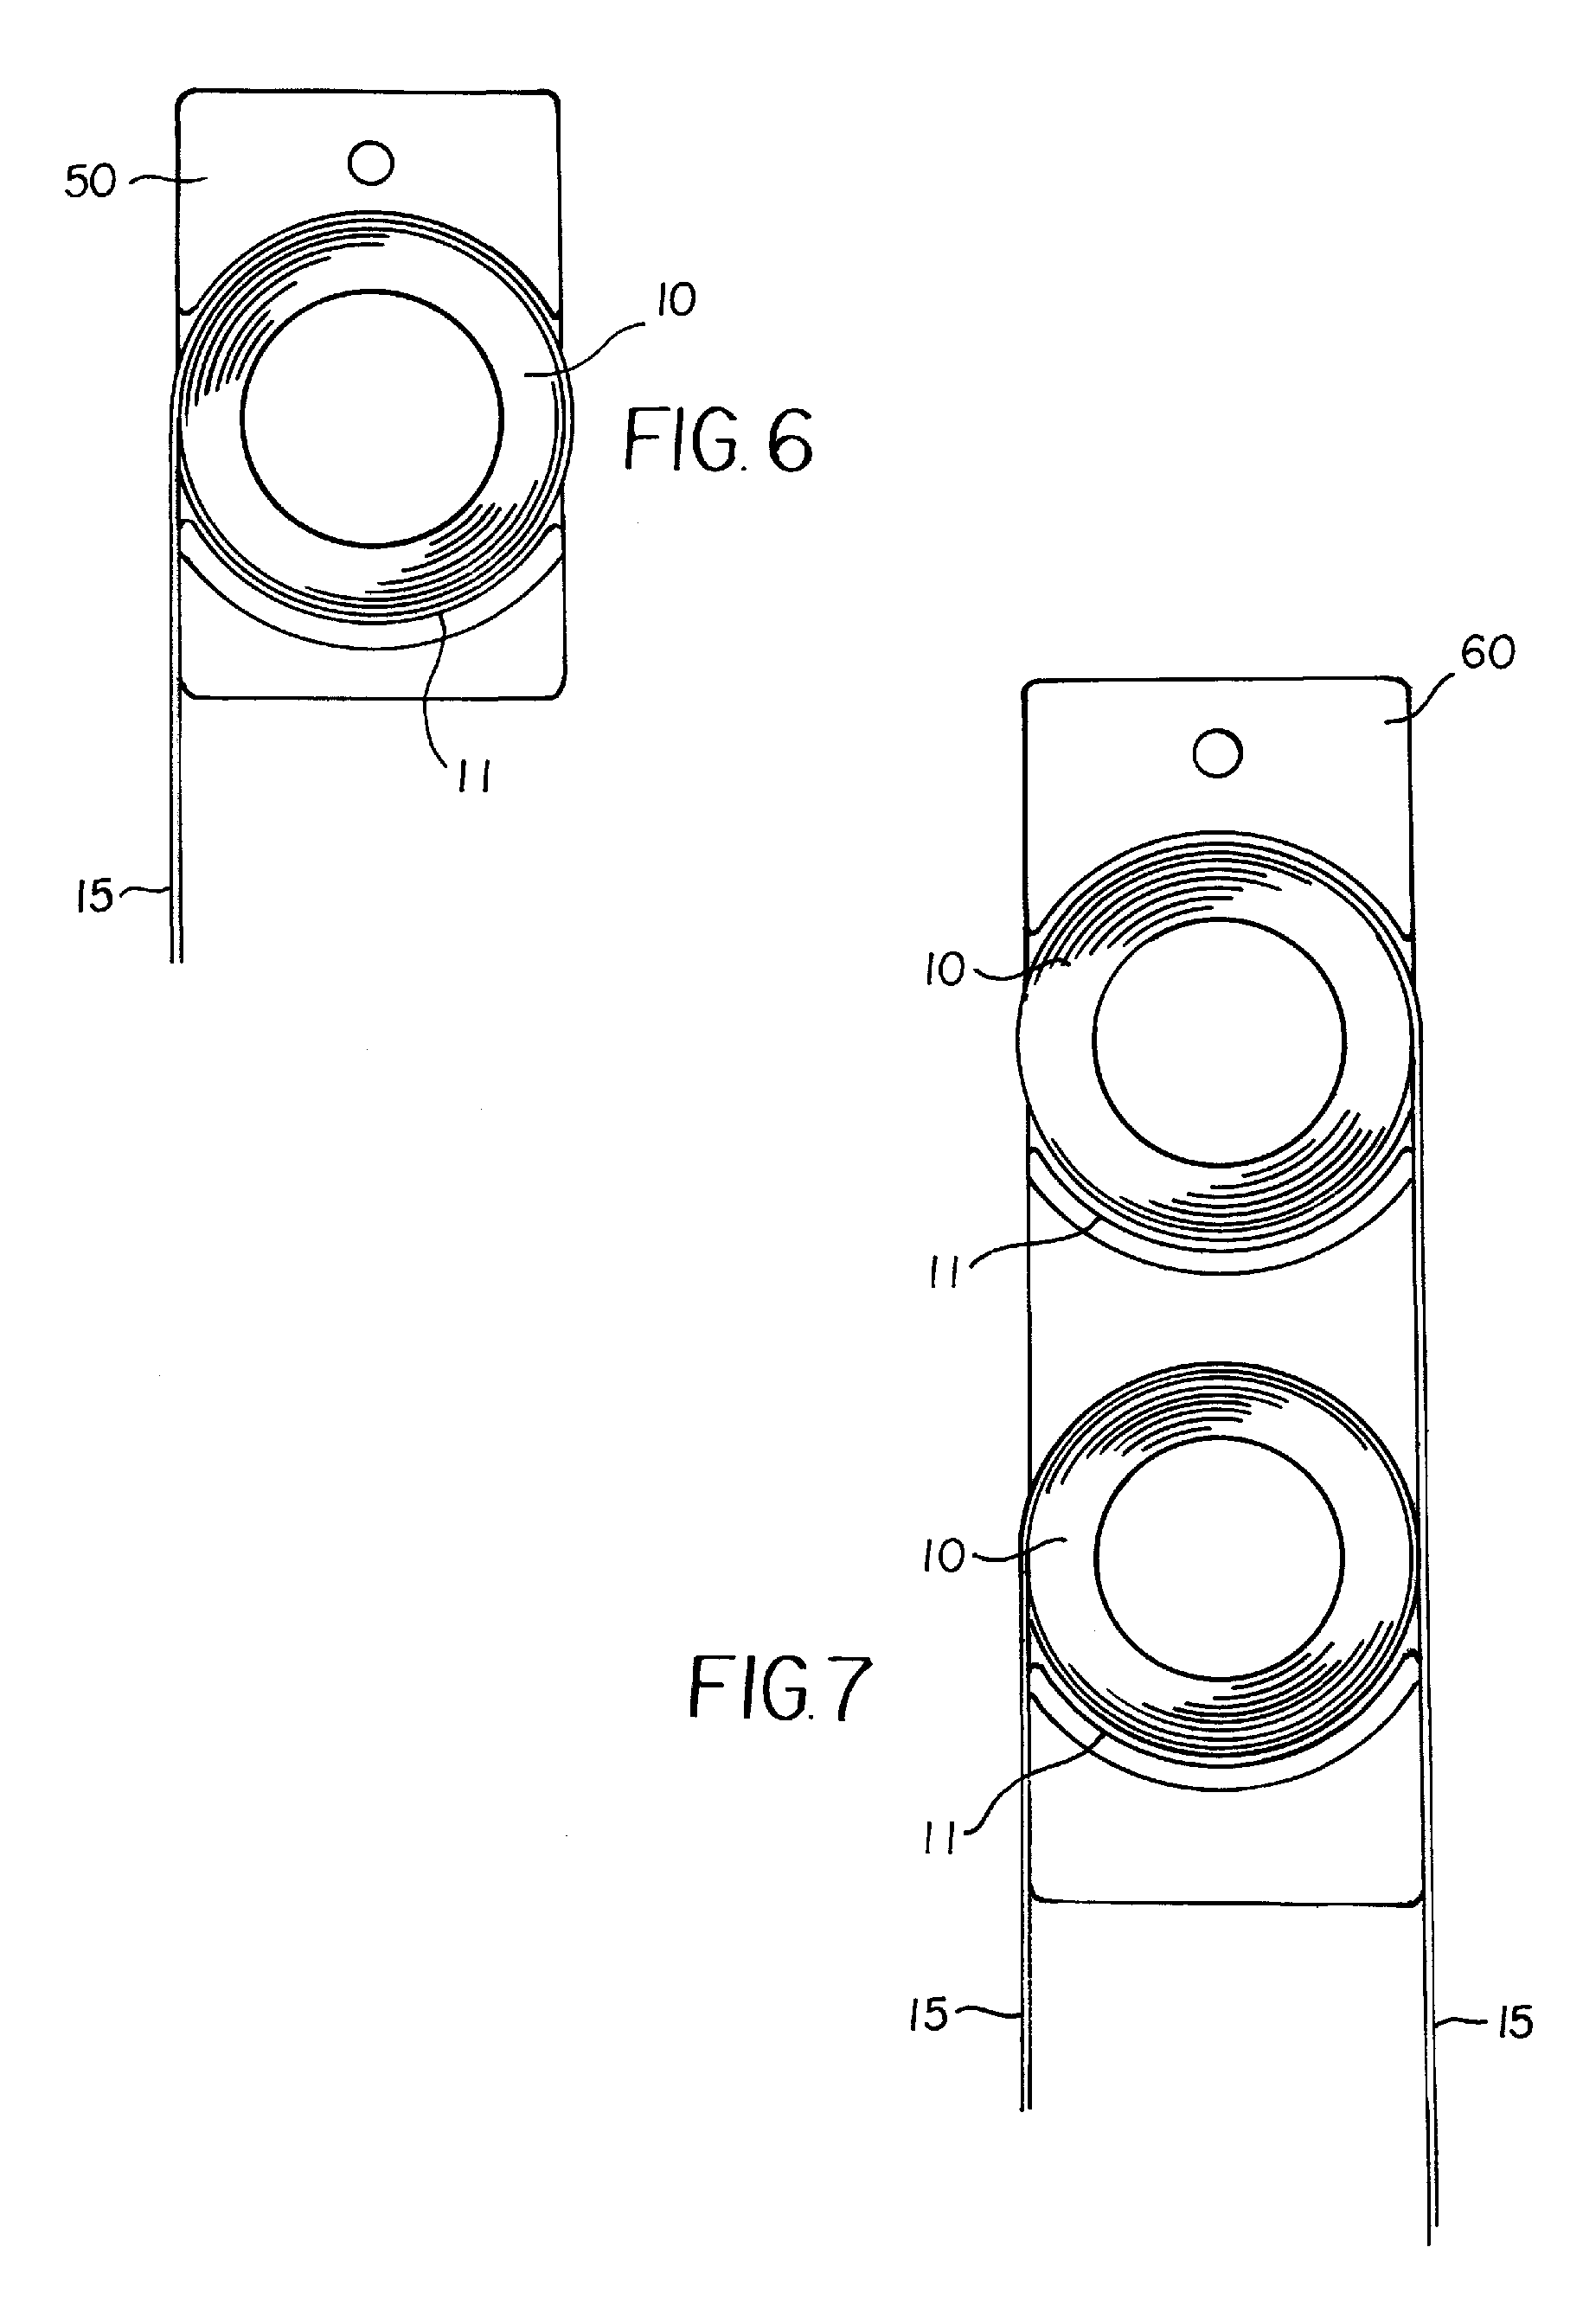 Frictional drop resistance for sash counterbalanced by curl springs